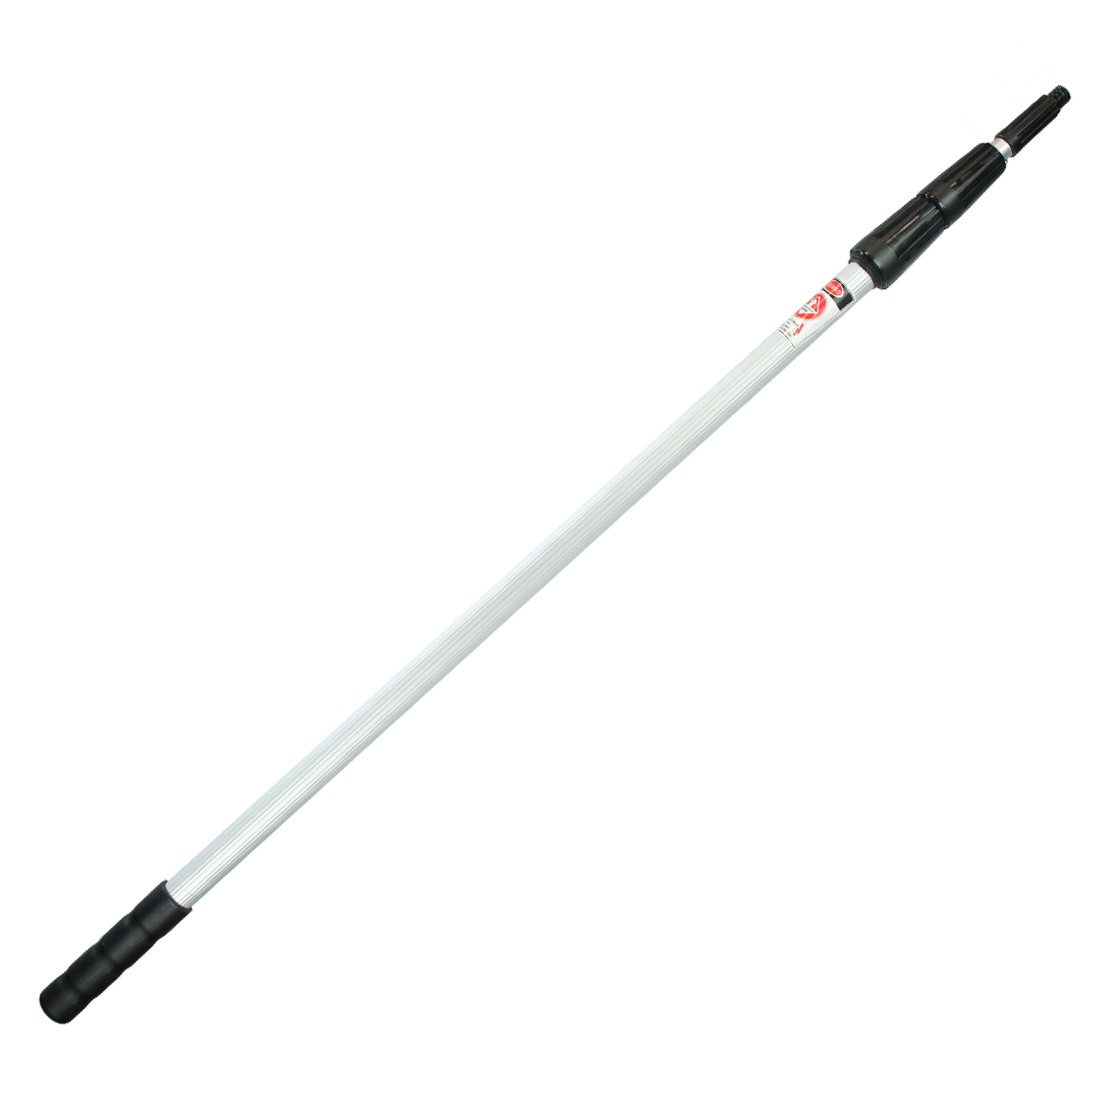 Pulex-Telescopic-Pole-3-Section-Angled-View